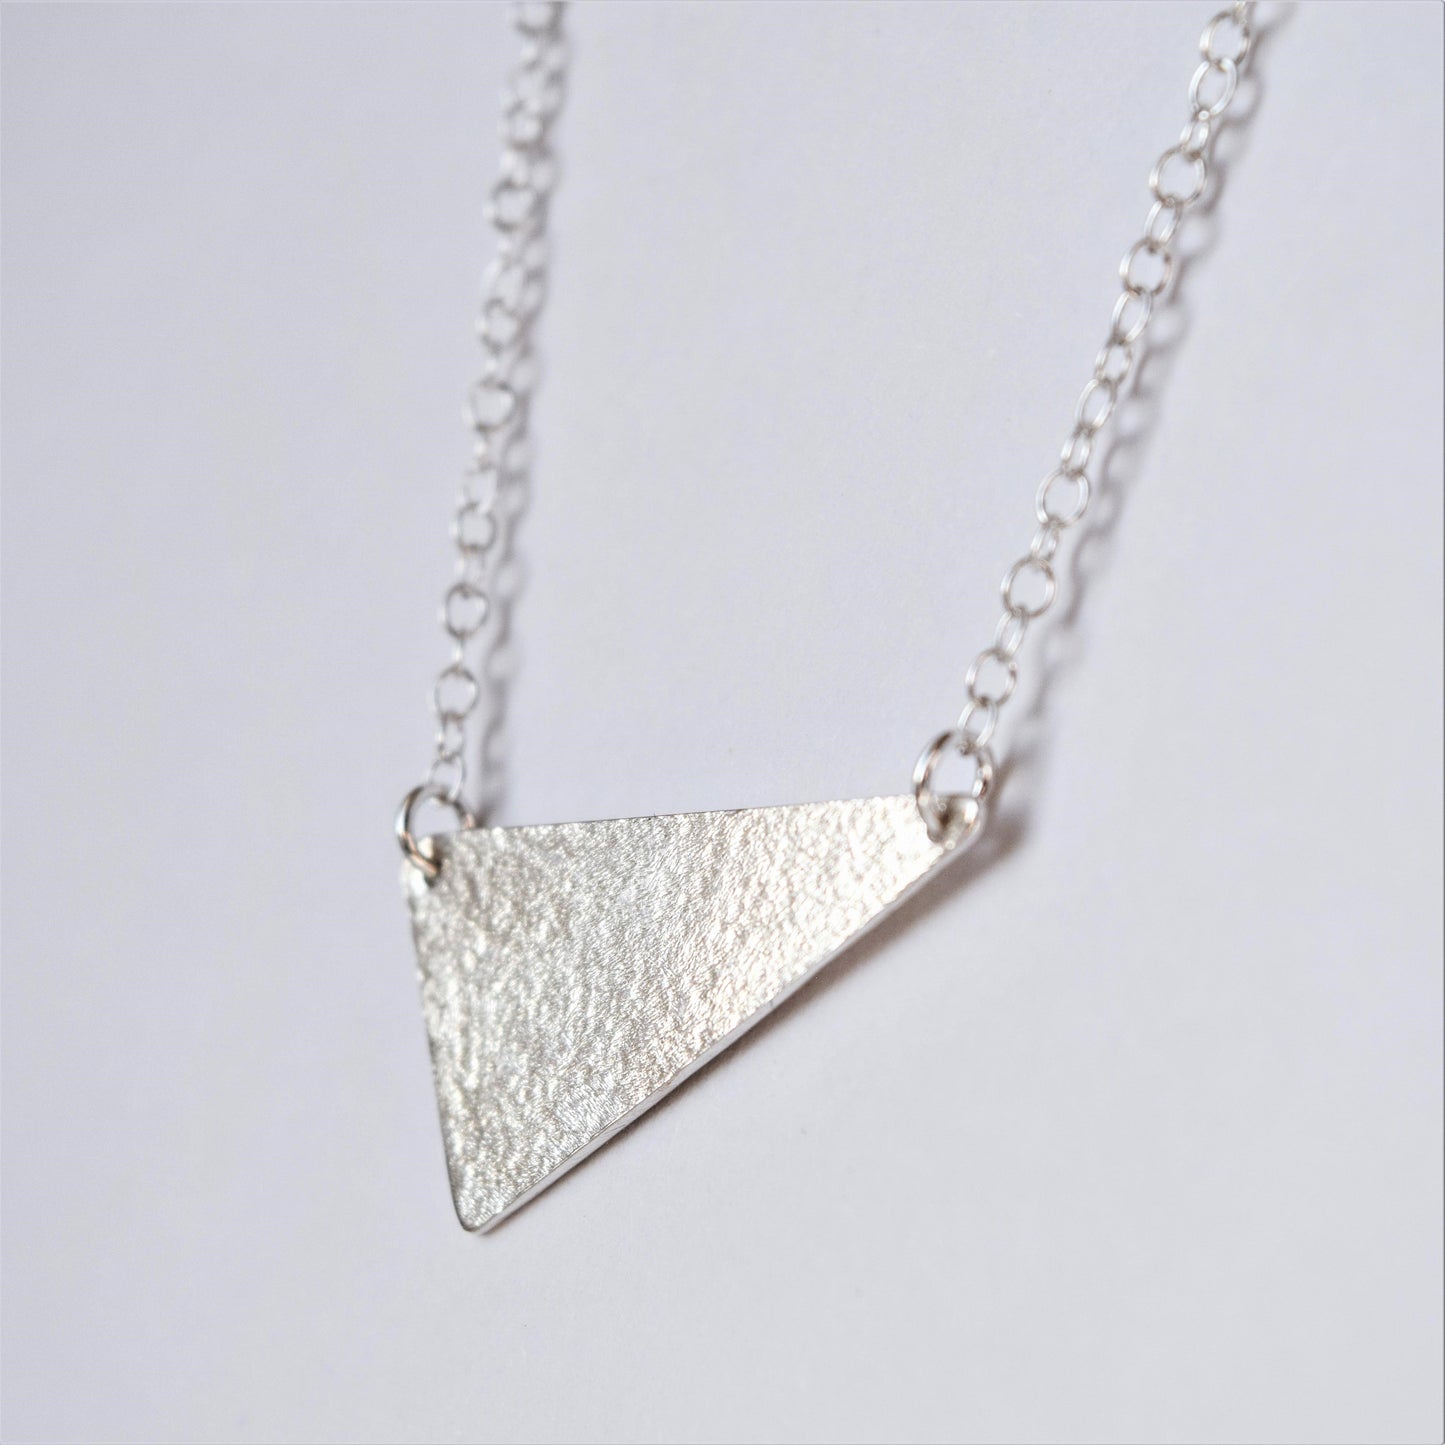 MUKA studio triangle necklace close up showing textured finish on silver pendant